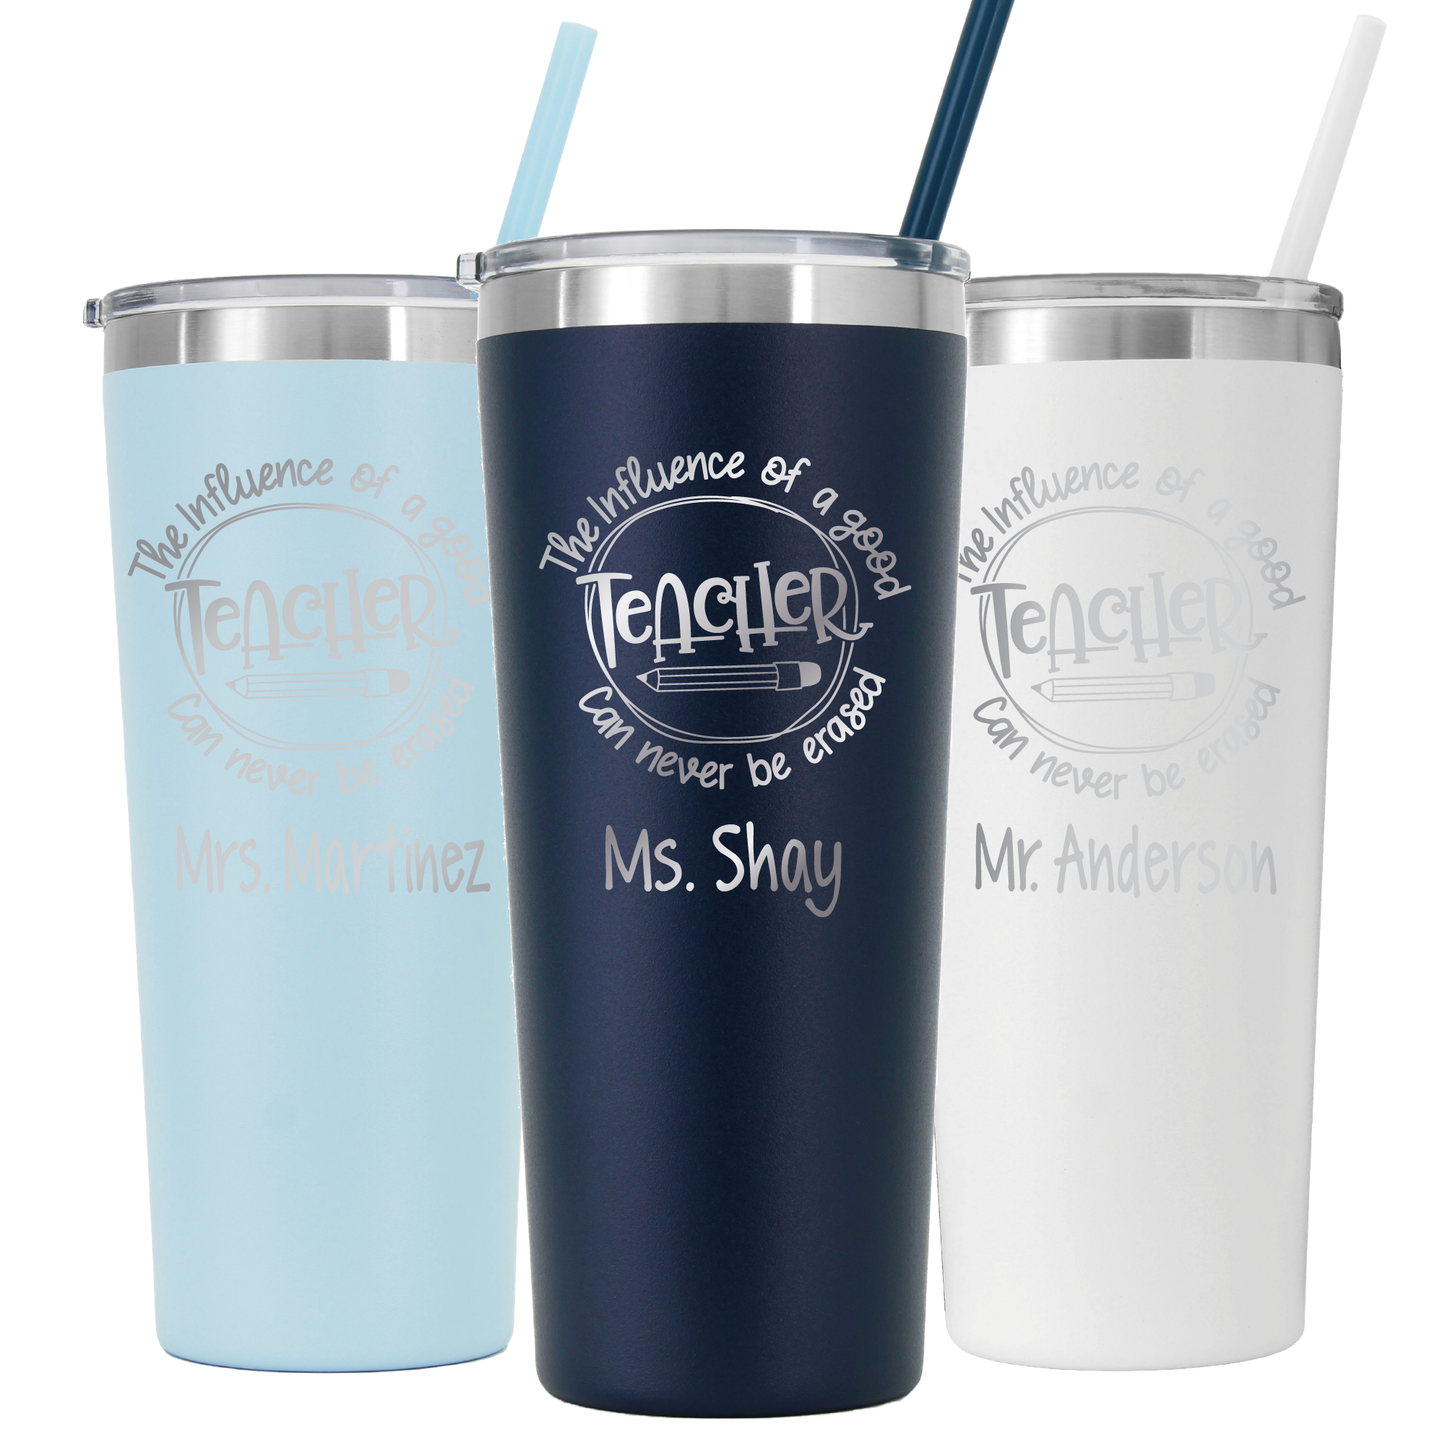 Era Series: Tumblers with Straw and Handle